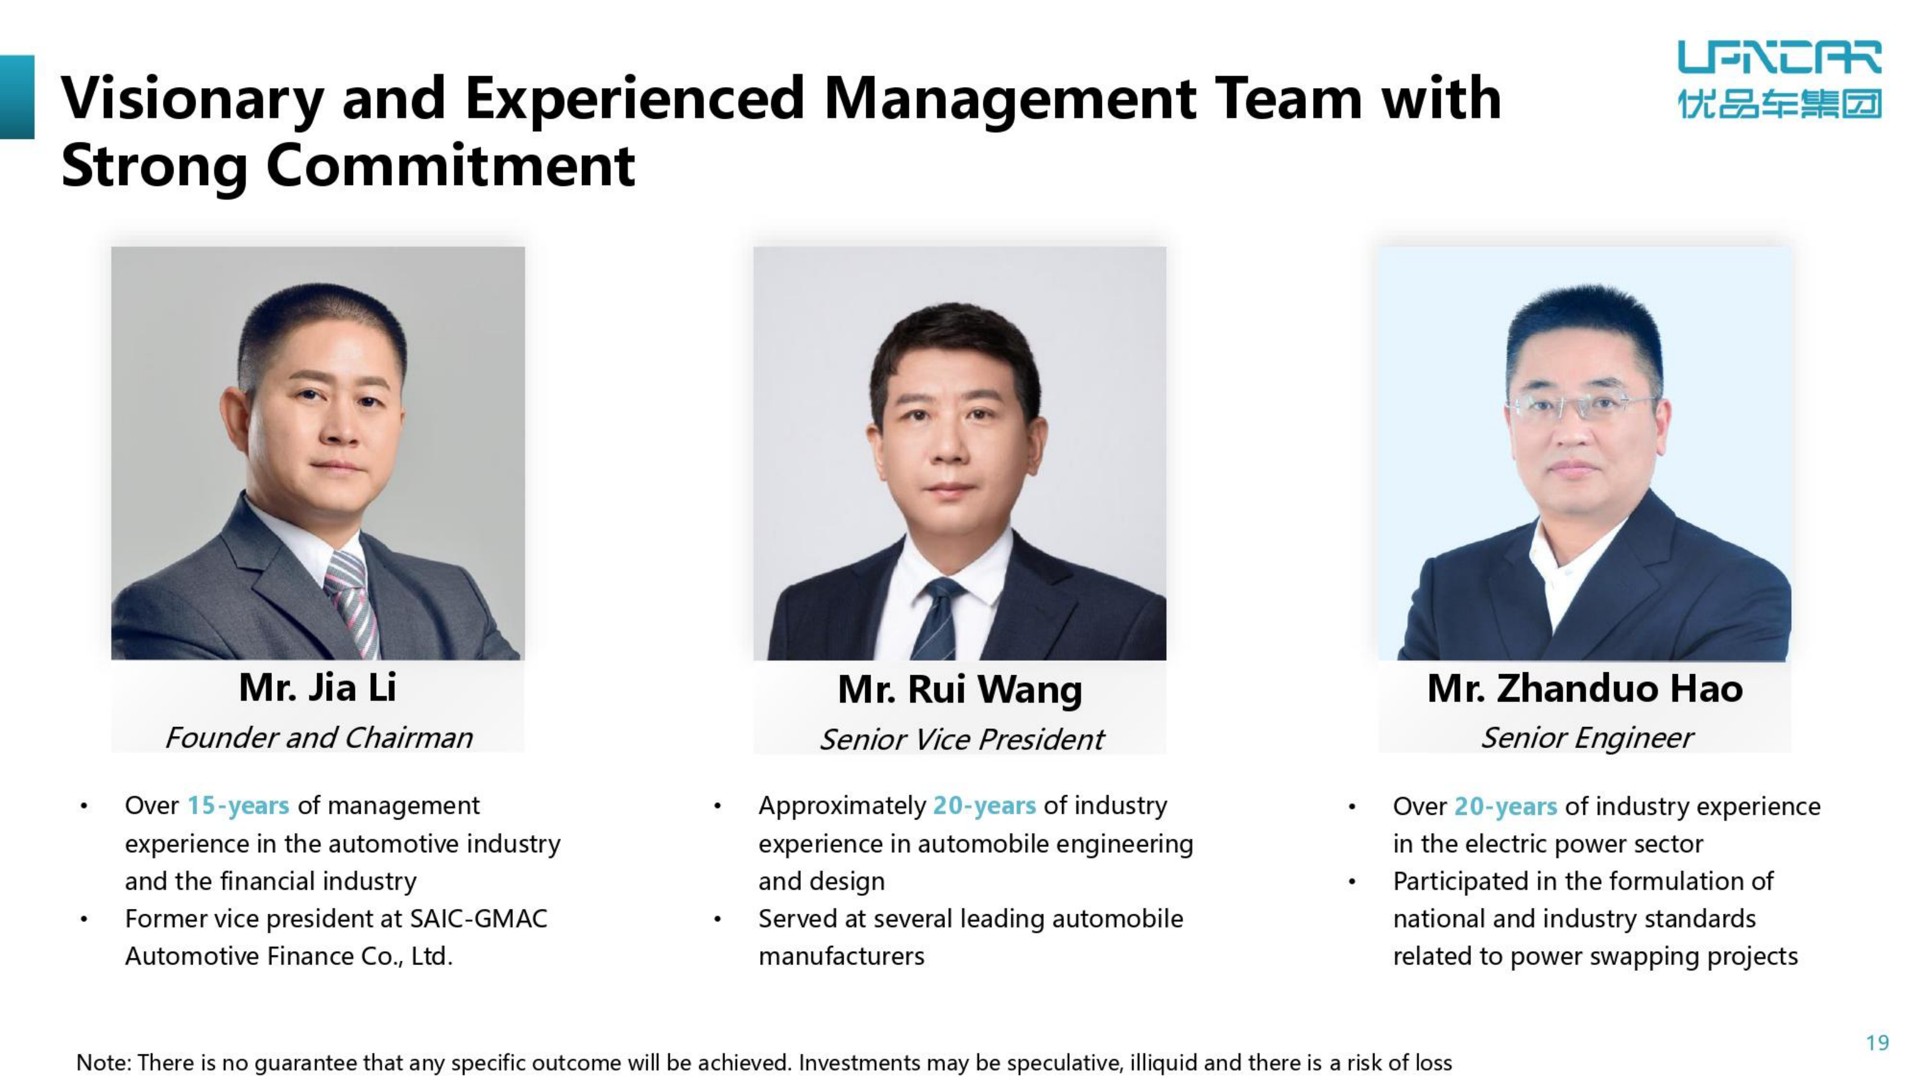 visionary and experienced management team with nee strong commitment | U Power